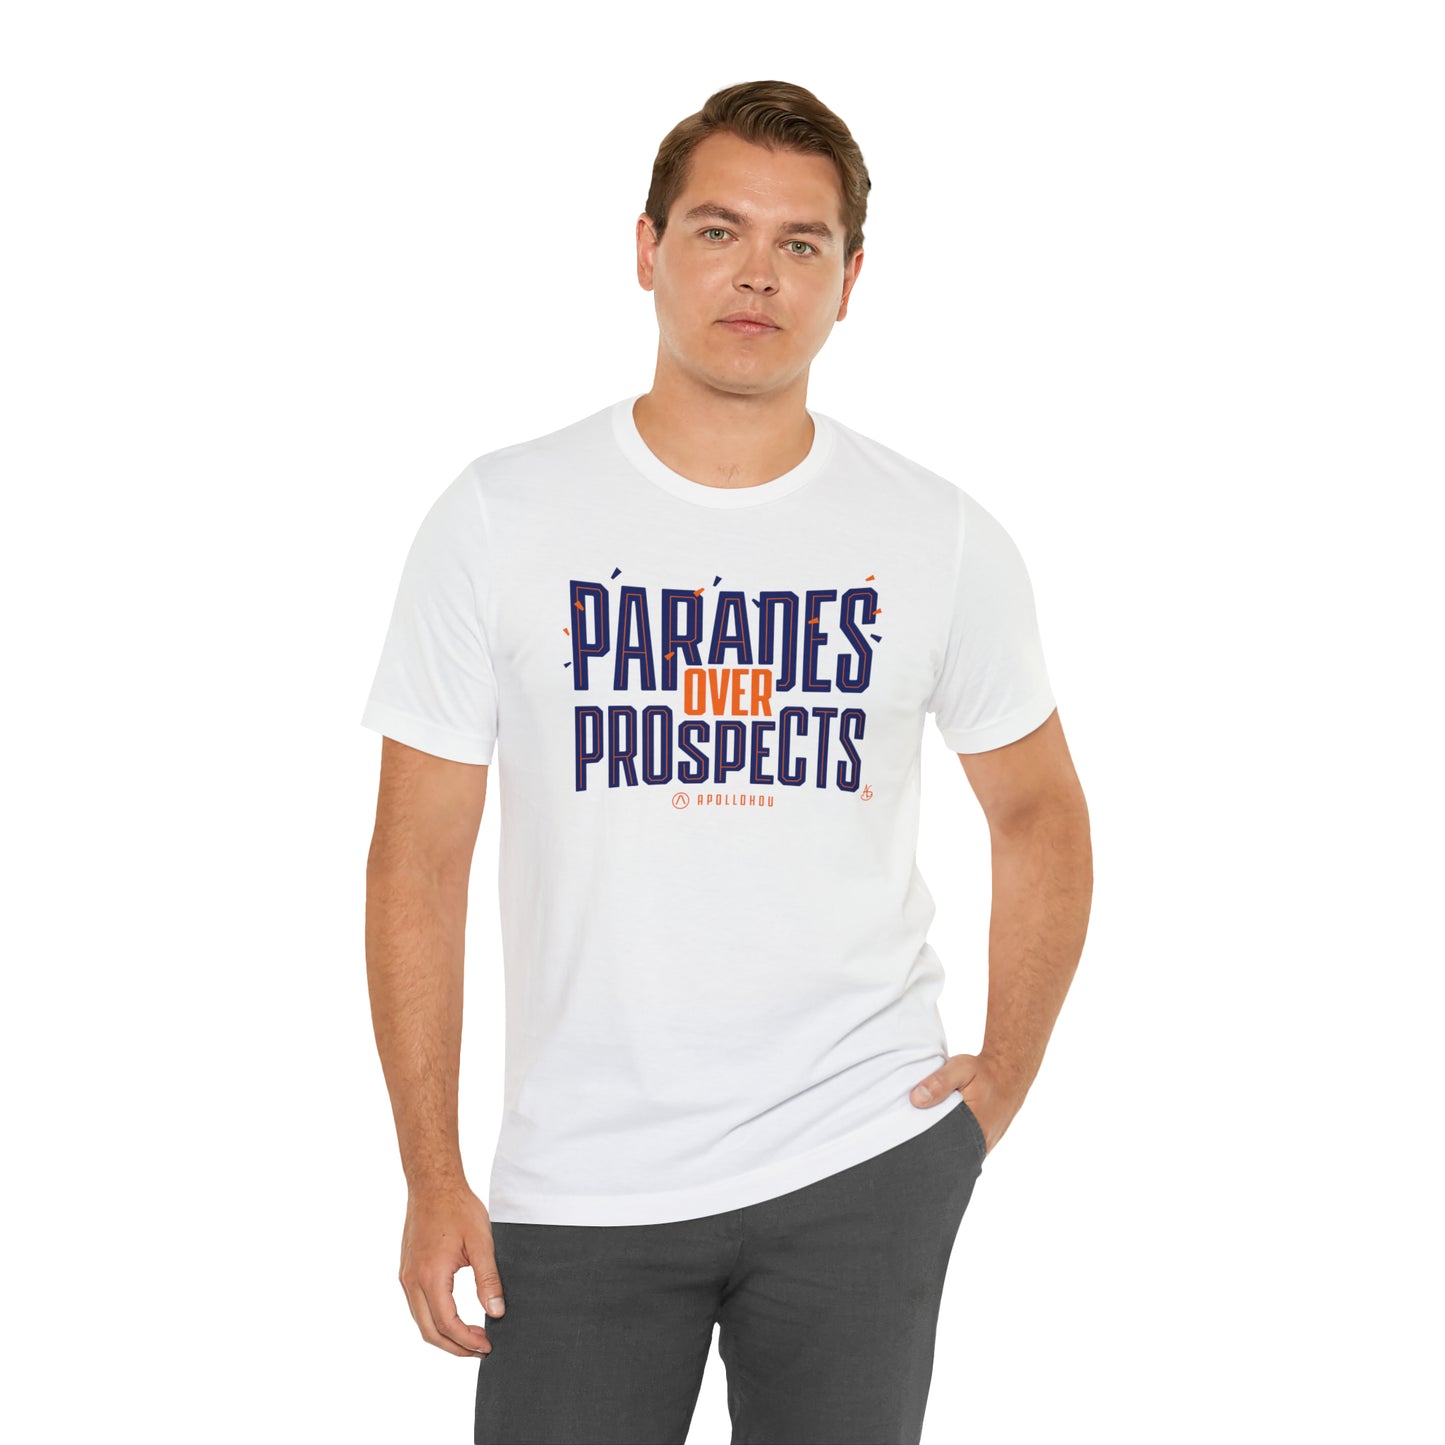 Parades Over Prospects Unisex Jersey Tee